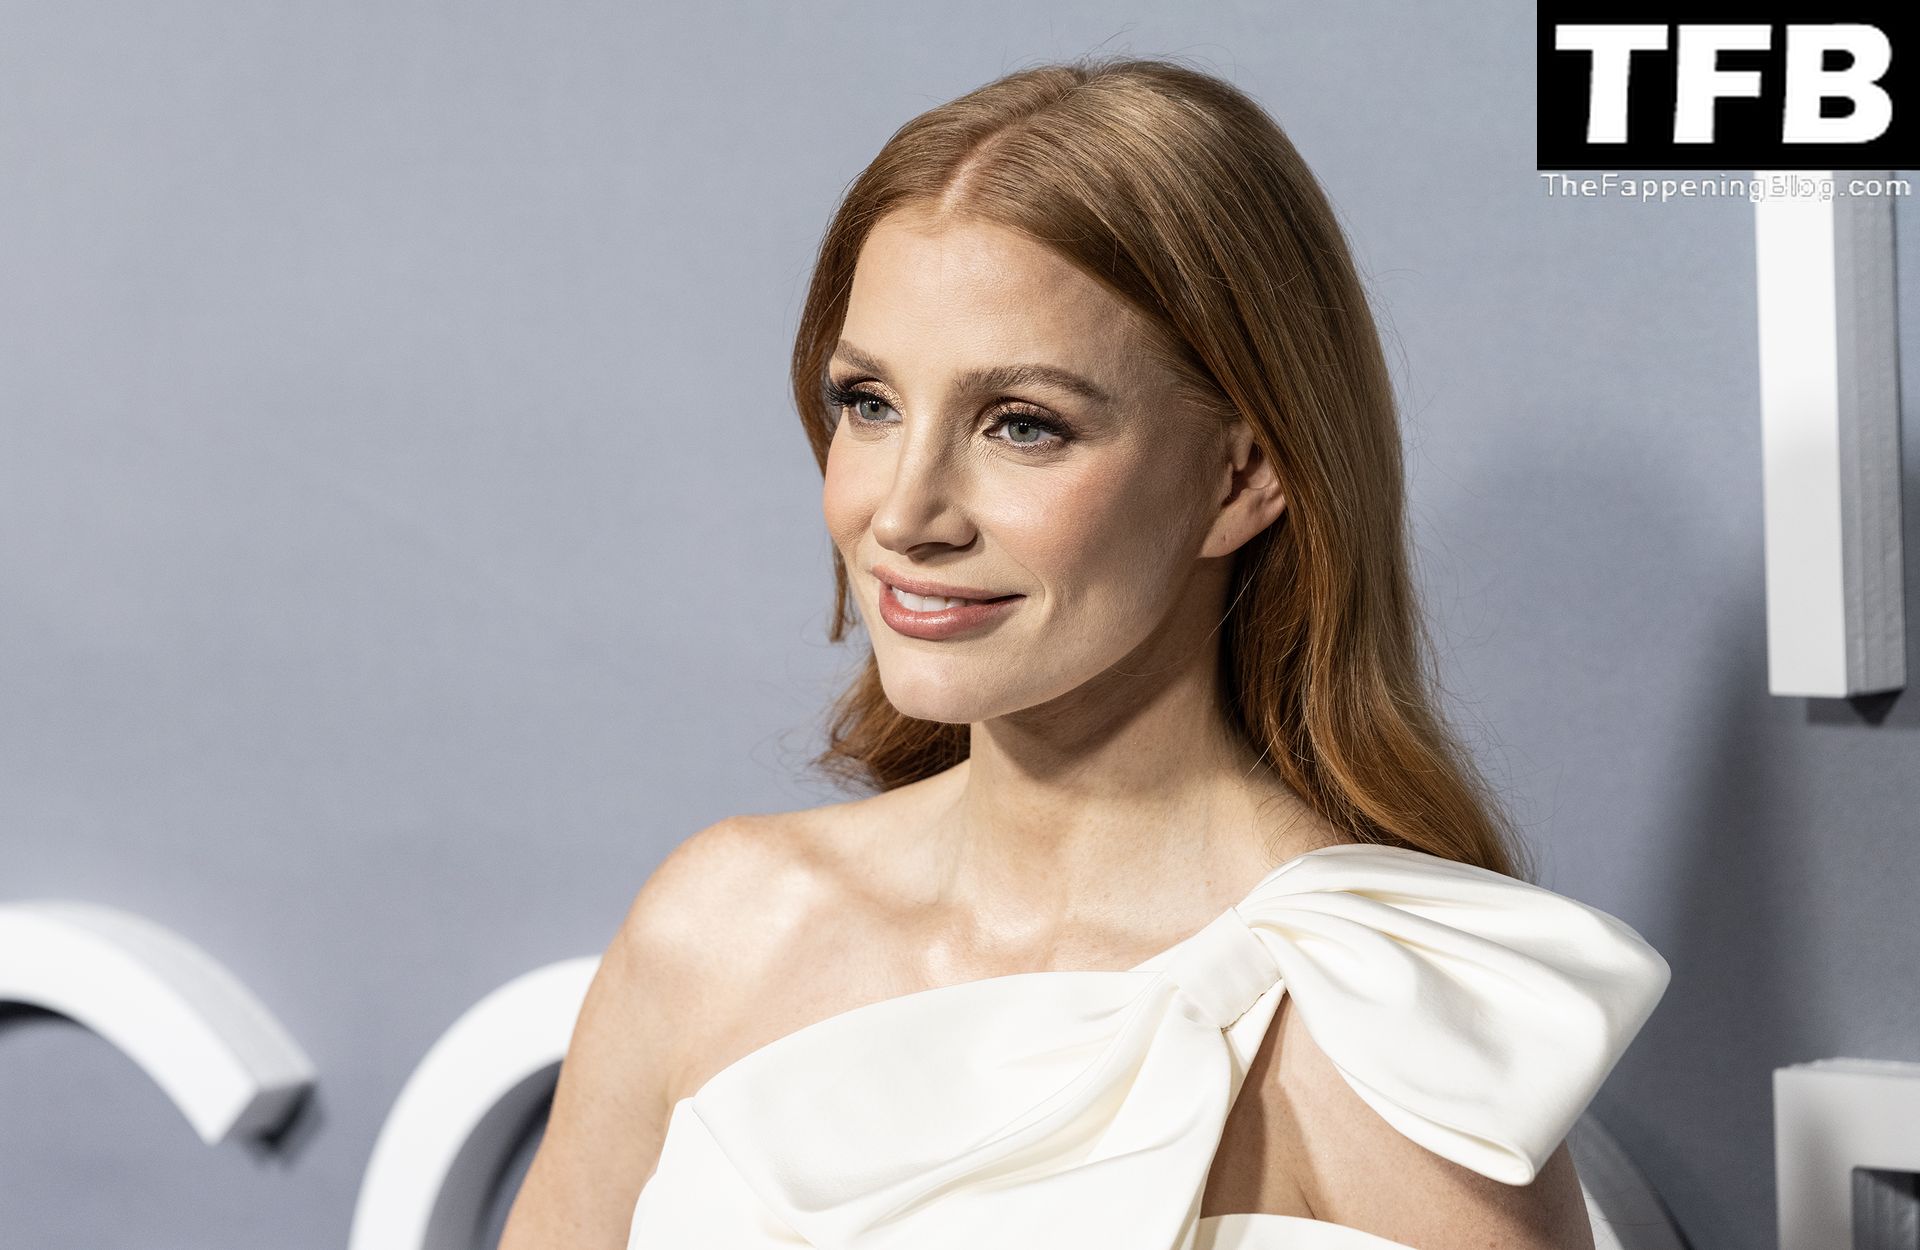 Jessica-Chastain-Sexy-The-Fappening-Blog-2-1.jpg